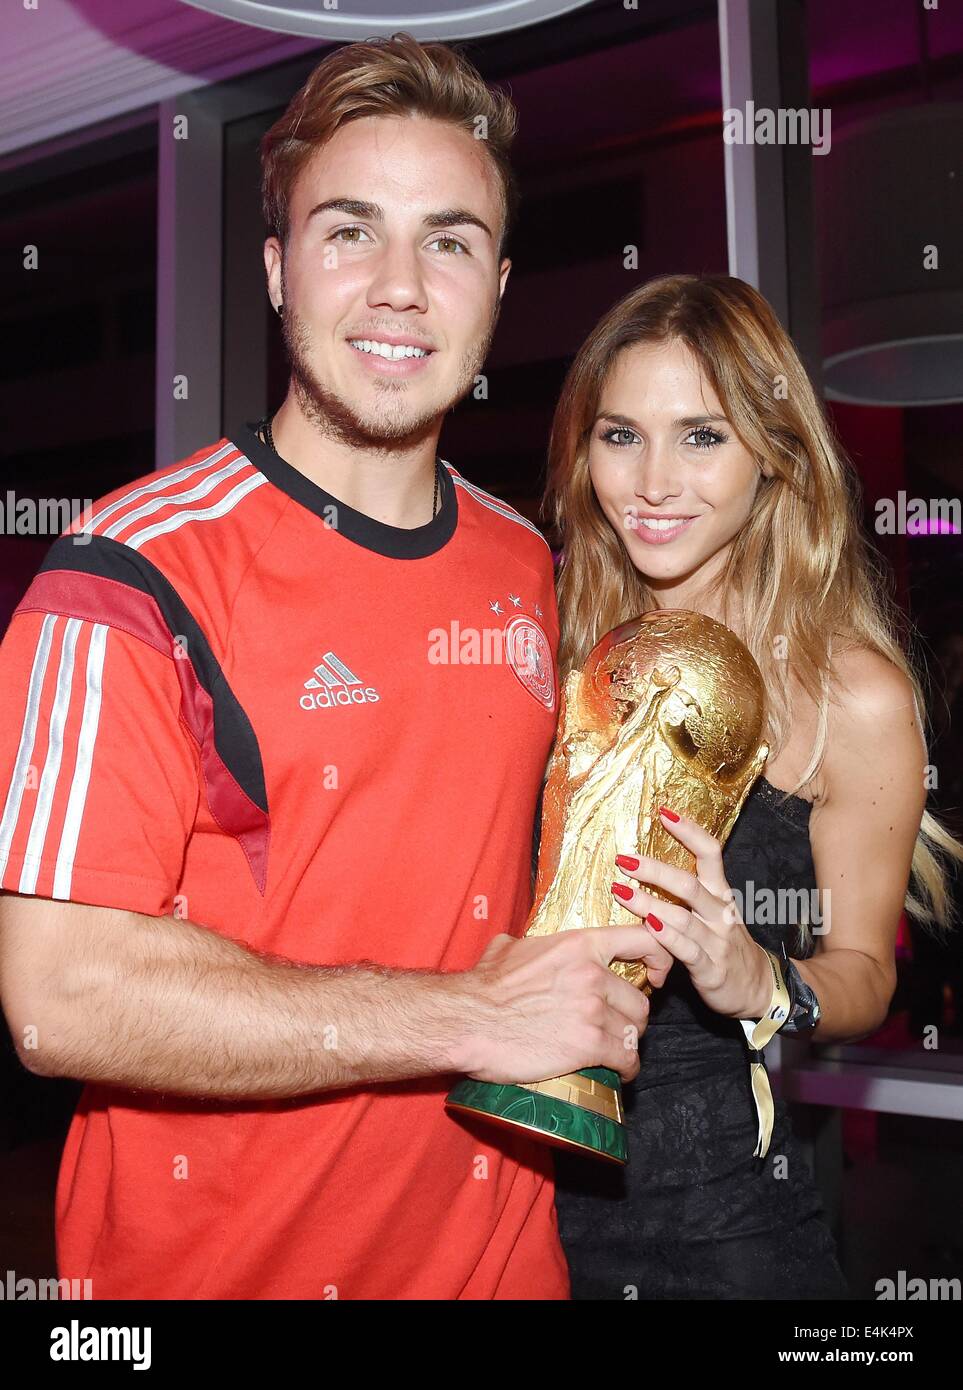 Handout: Rio de Janeiro, Brazil. 14th July, 2014. Mario Goetze (L) and his girlfriend Ann-Kathrin Broemmel celebrating the victory in the Soccer World Cup with the trophy at Hotel Sheraton in Rio De Janeiro, Brazil on 13 July 2014. Germany won 1-0 against Argentina in the FIFA World Cup 2014 Final match. (: Image for in connection with the current reporting on the World Cup and together with the source: Foto: Markus Gilliar/DFB/dpa.) Credit:  dpa picture alliance/Alamy Live News Stock Photo